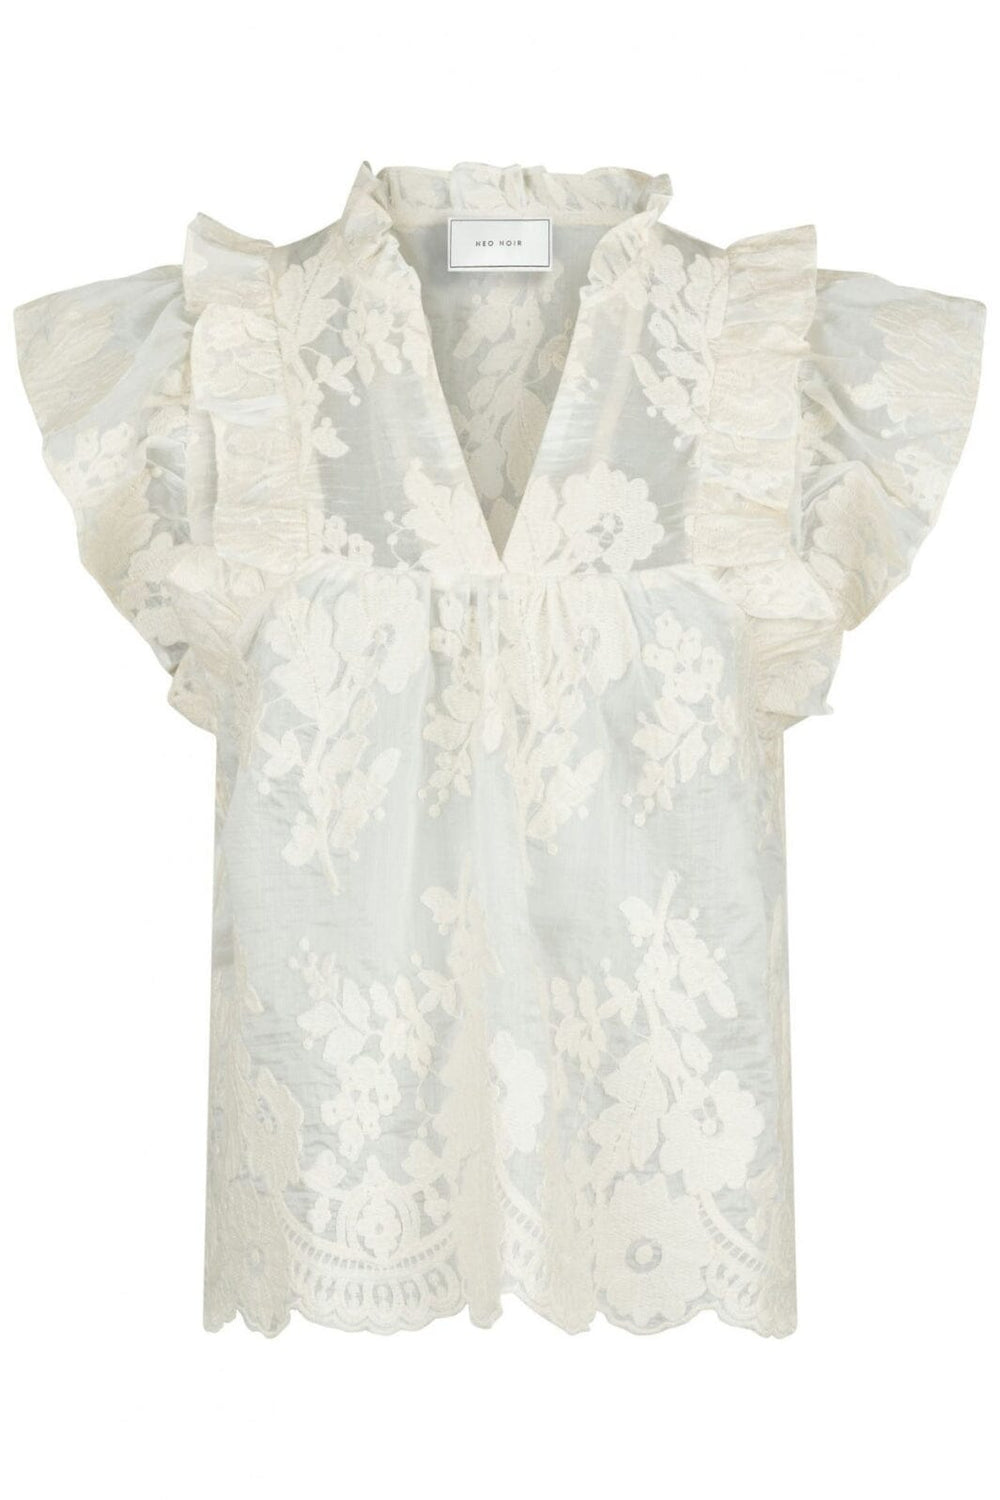 Neo Noir - Jayla Big Embroidery Top - Off White Toppe 